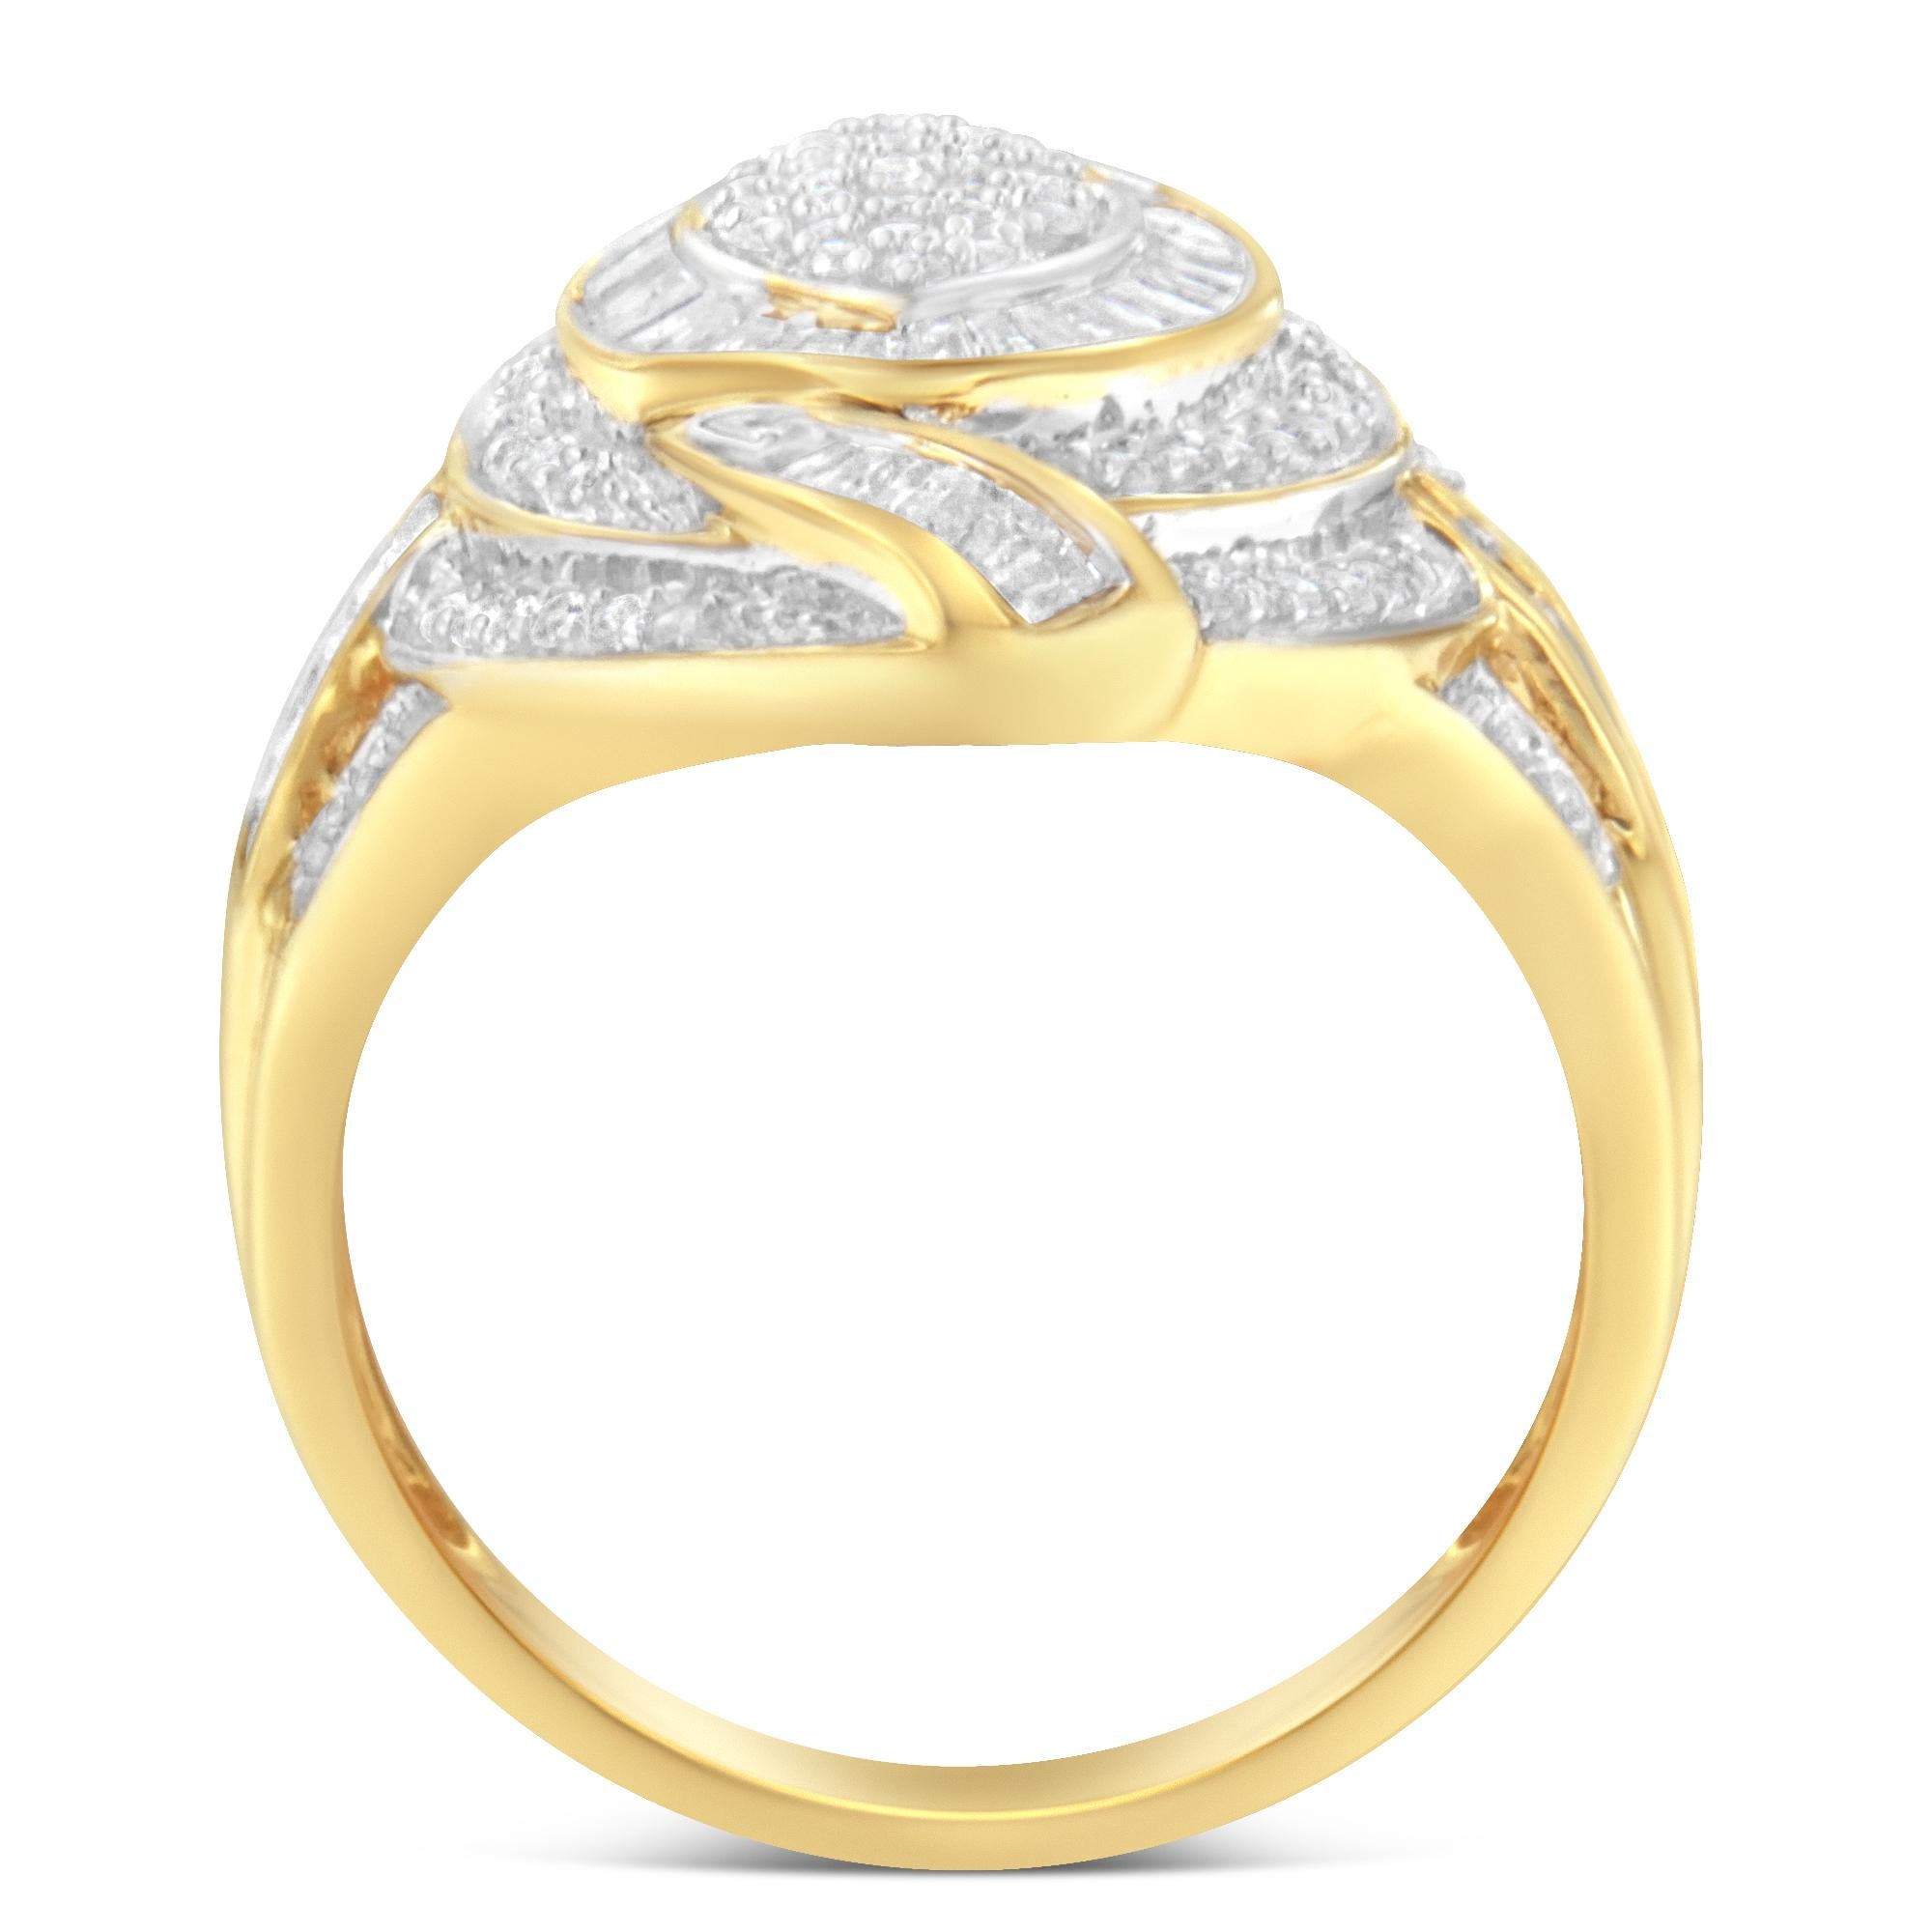 A diamond and gold cluster ring featuring a central cluster of round diamonds surrounded by bands of baguette and round diamonds. The ring contains 154 diamonds set in a 10 karat yellow gold band. Combined the diamonds weigh 1.02 carats.

Product